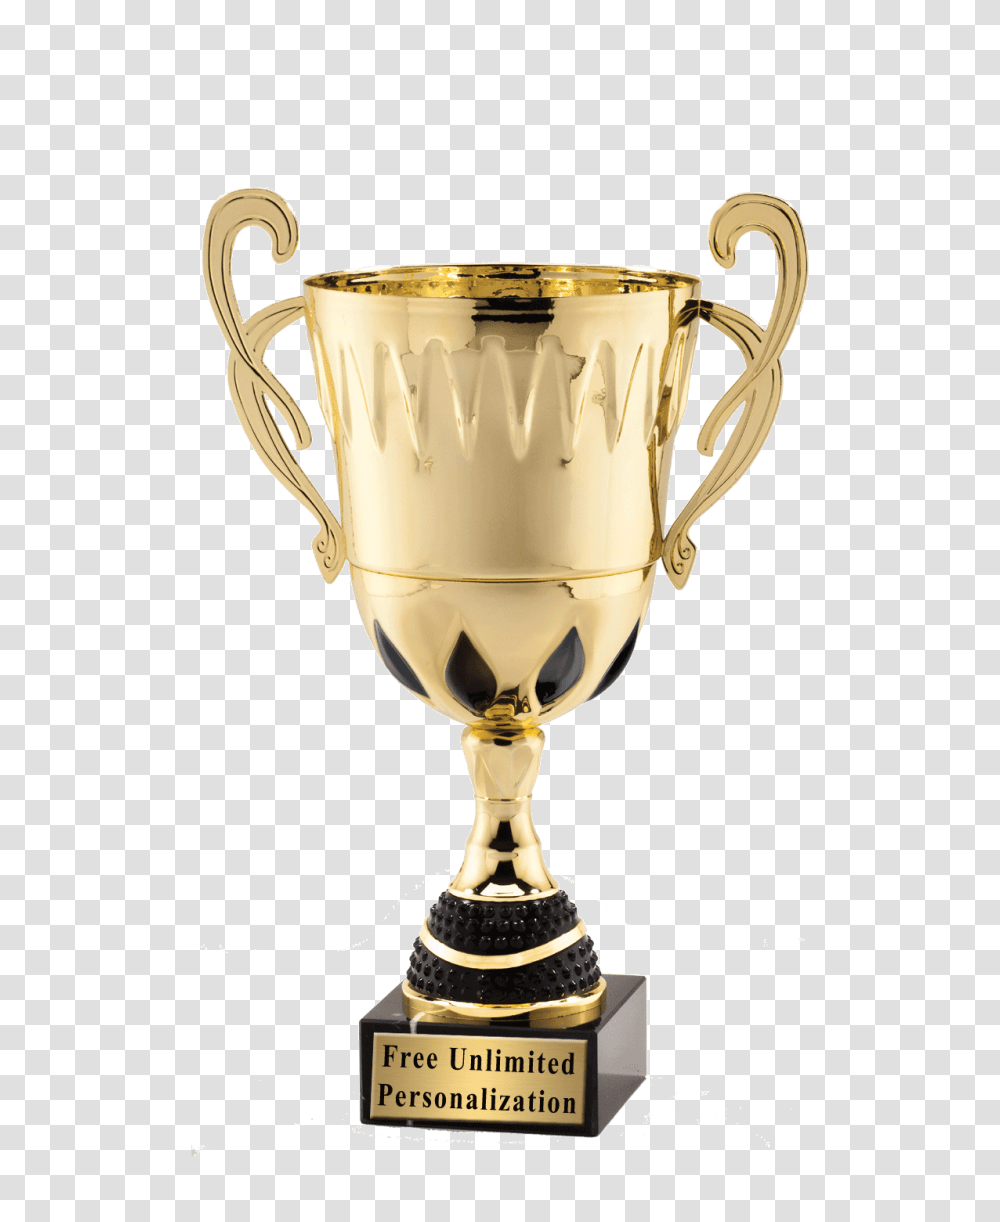 Download Hd Trophies & Awards Gold Cup Mens Trophy, Mixer, Appliance Transparent Png